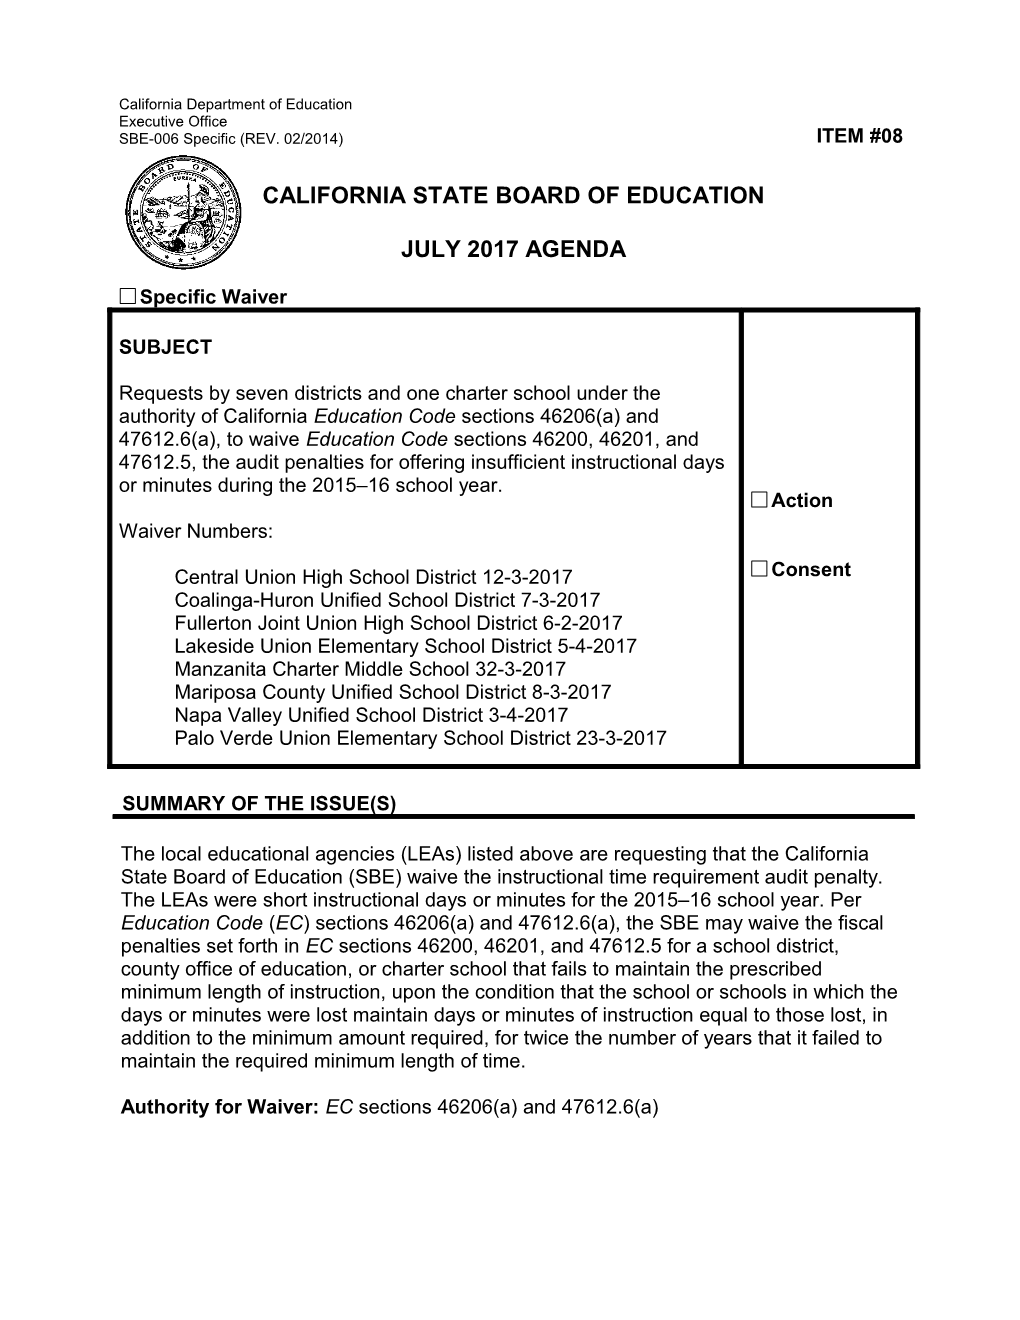 July 2017 Waiver Item W-08 - Meeting Agendas (CA State Board of Education)